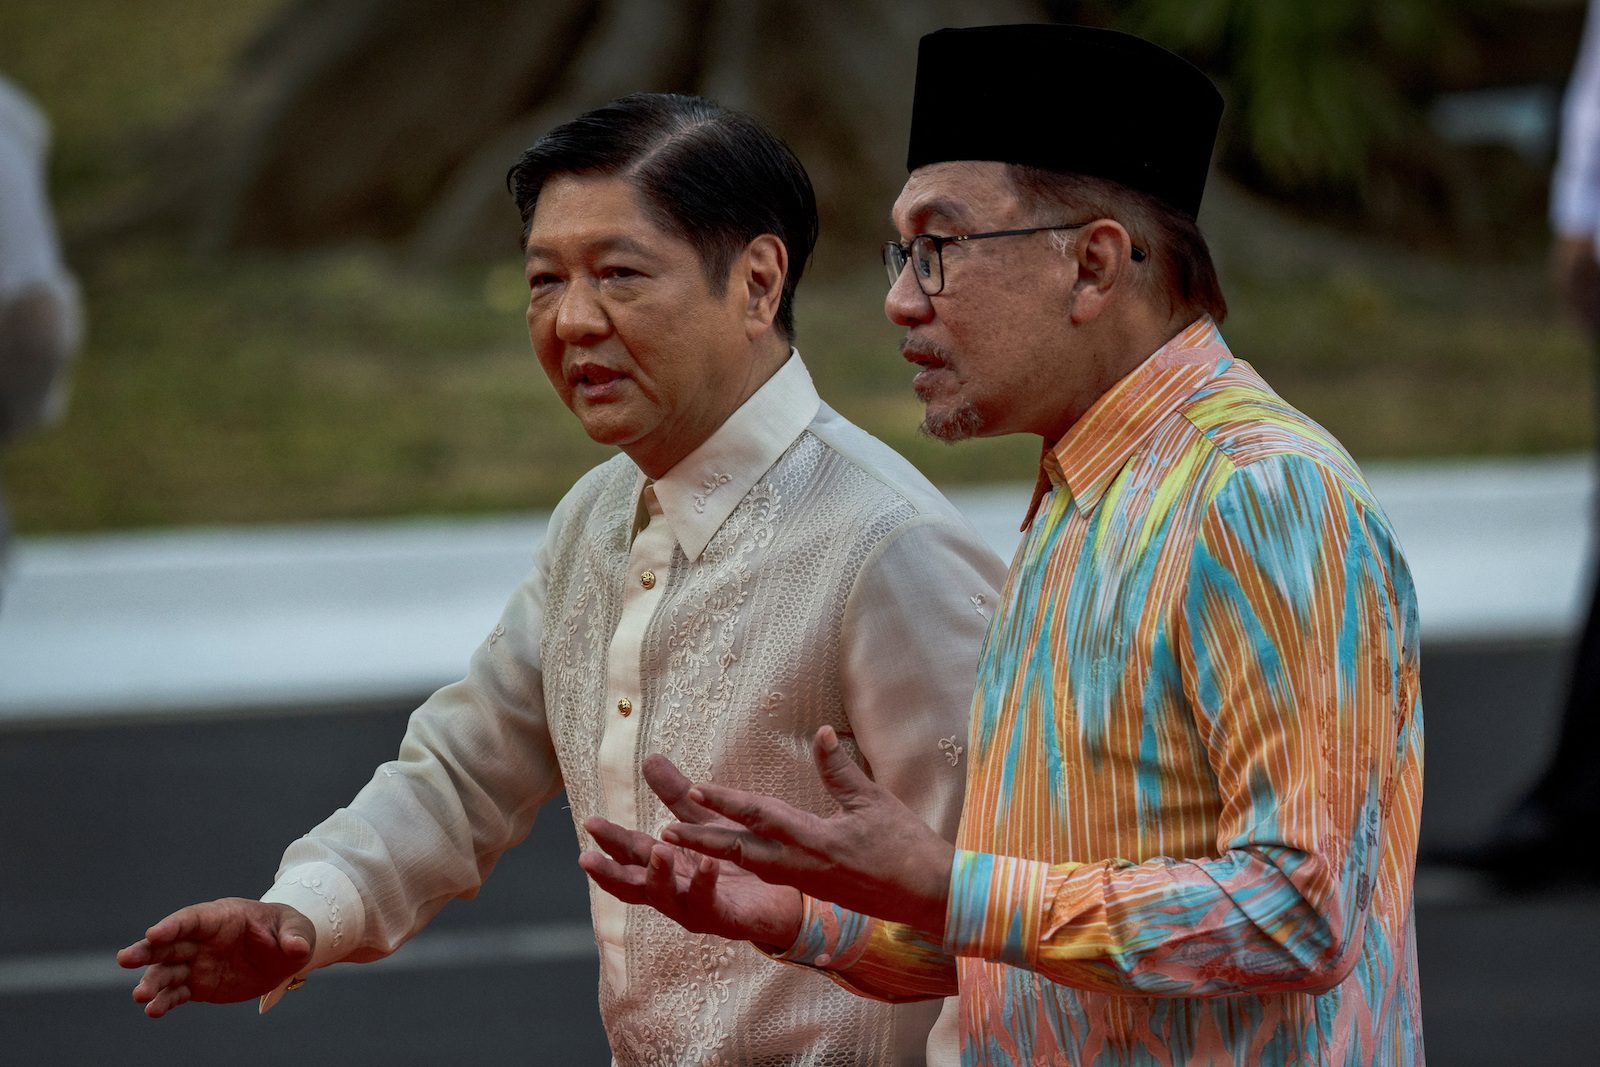 Malaysia prime minister says Myanmar crisis affecting region’s security